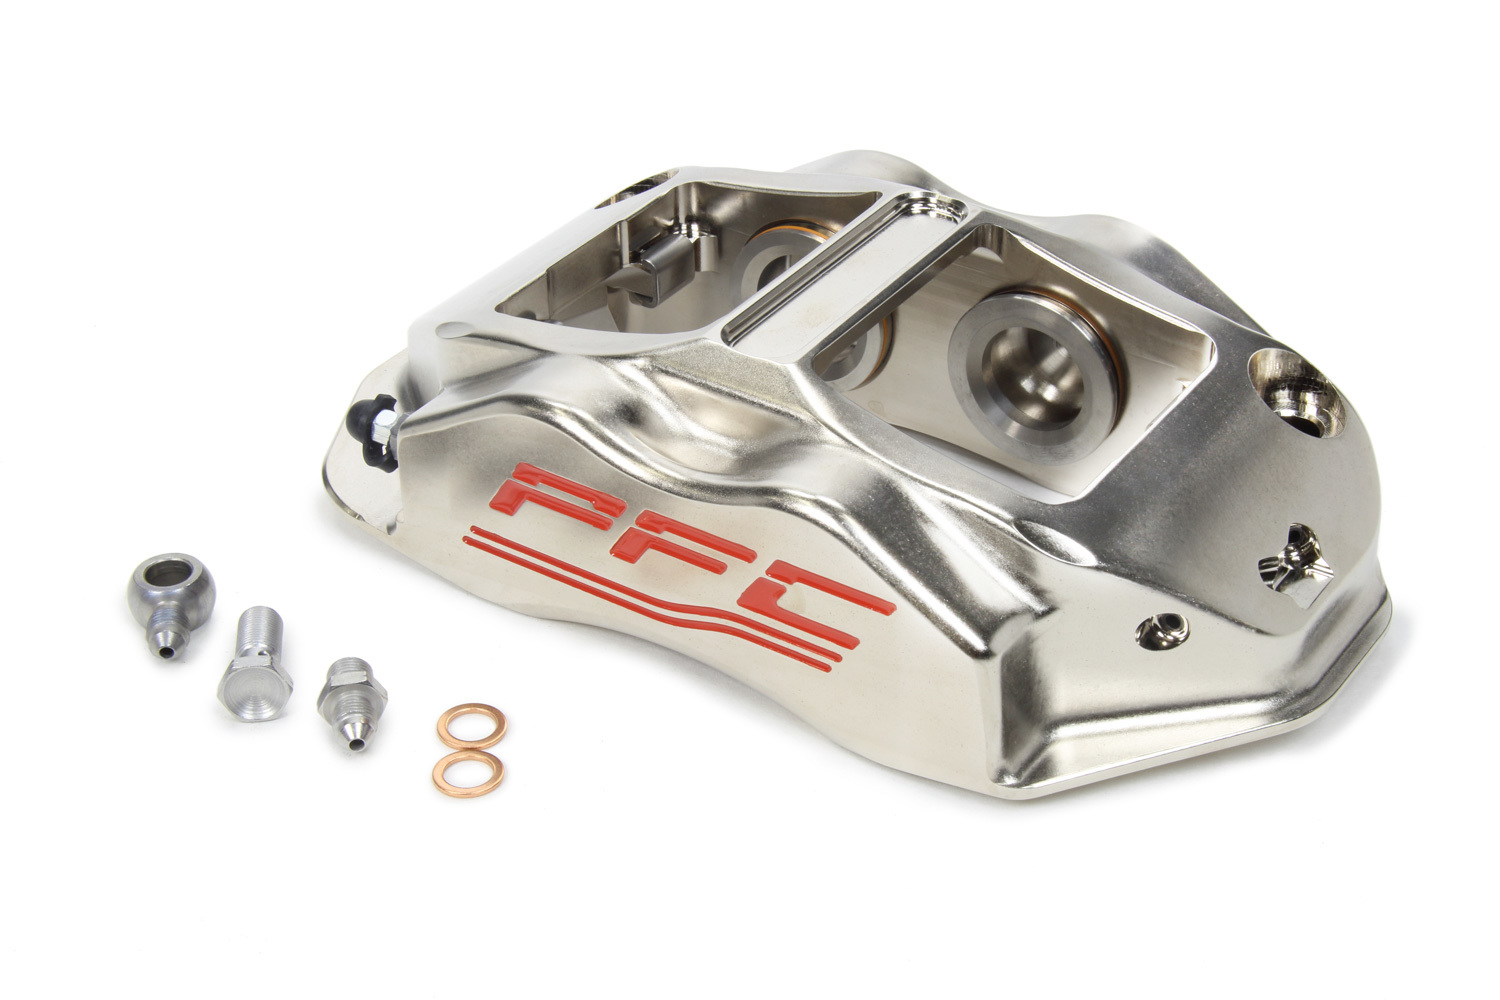 Performance Friction 94.323.410.440.11 Brake Caliper, ZR94, Driver Side, Trailing, 4 Piston, Aluminum, Nickel Plated, 12.716 in OD x 1.250 in Thick Rotor, 7.00 in Radial Mount, Each